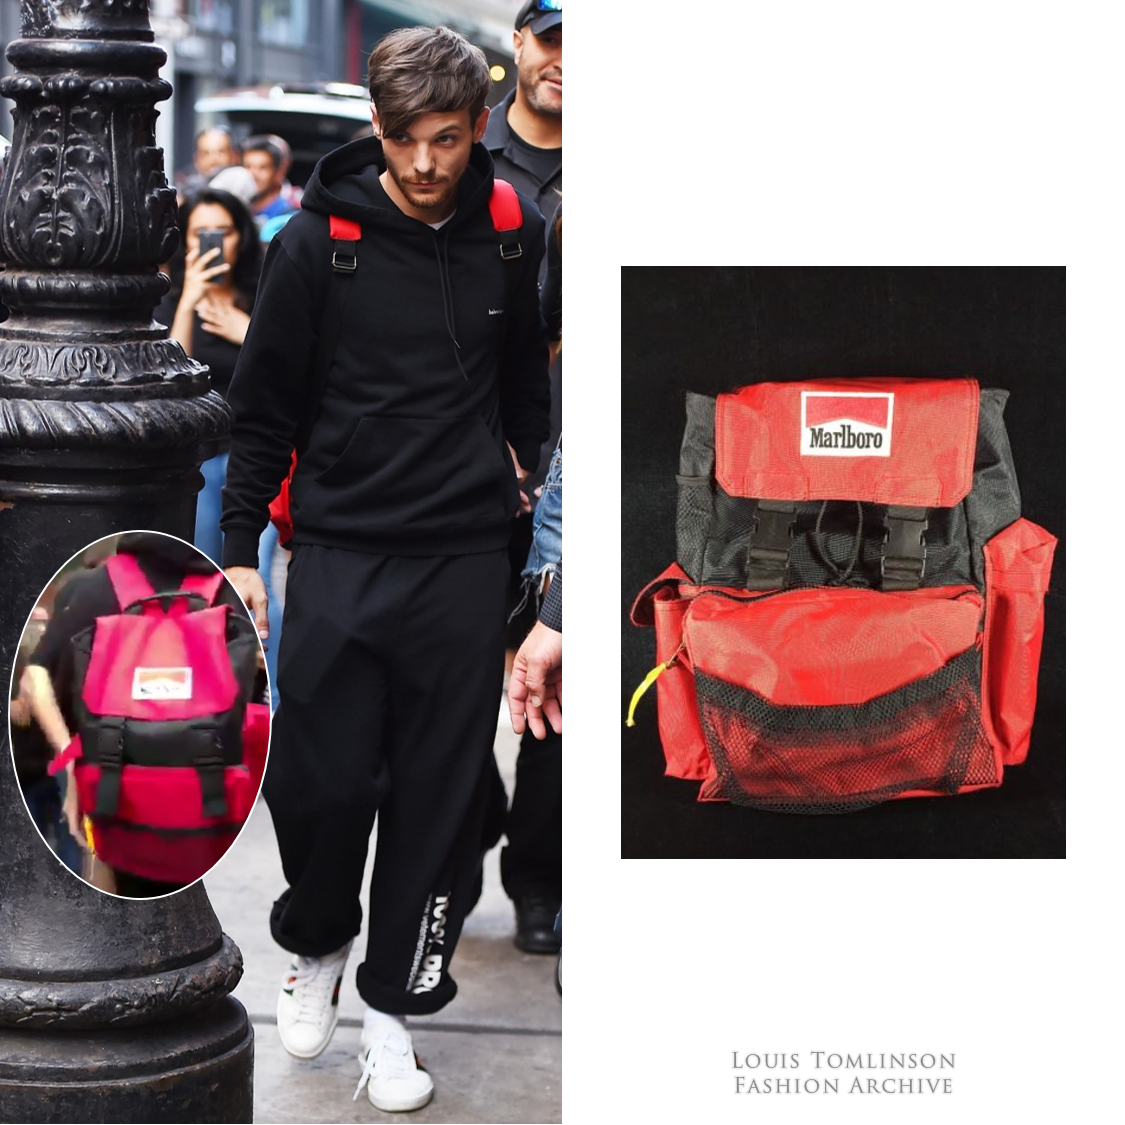 Louis Tomlinson Fashion Archive — Louis on set in New York